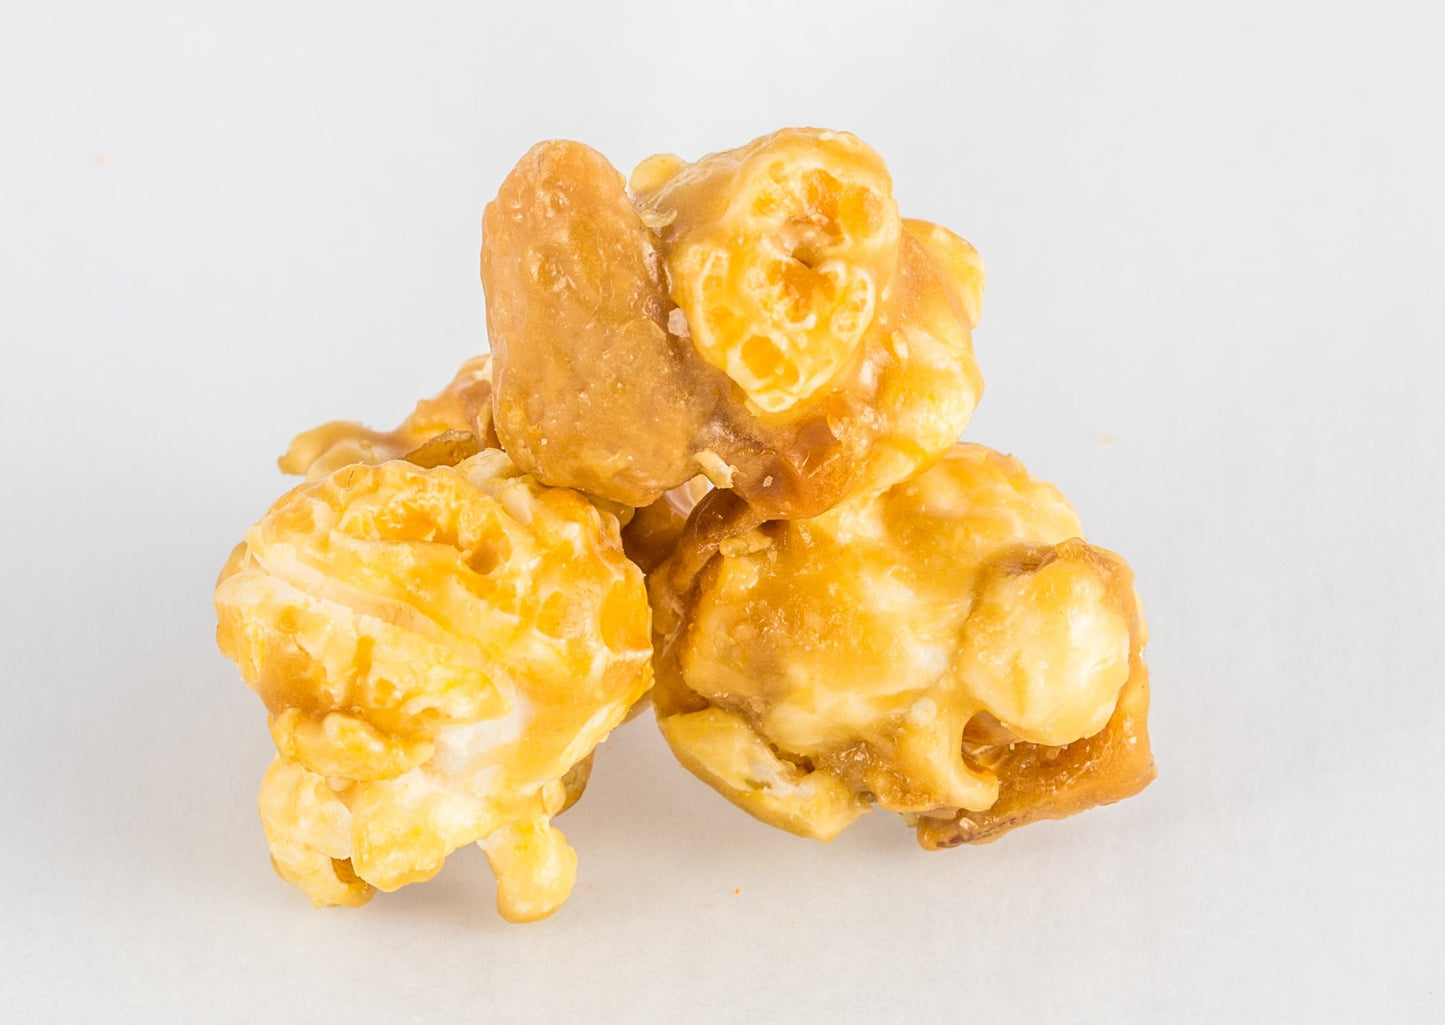 A pile of three pieces of caramel-coated popped popcorn with a cashew.